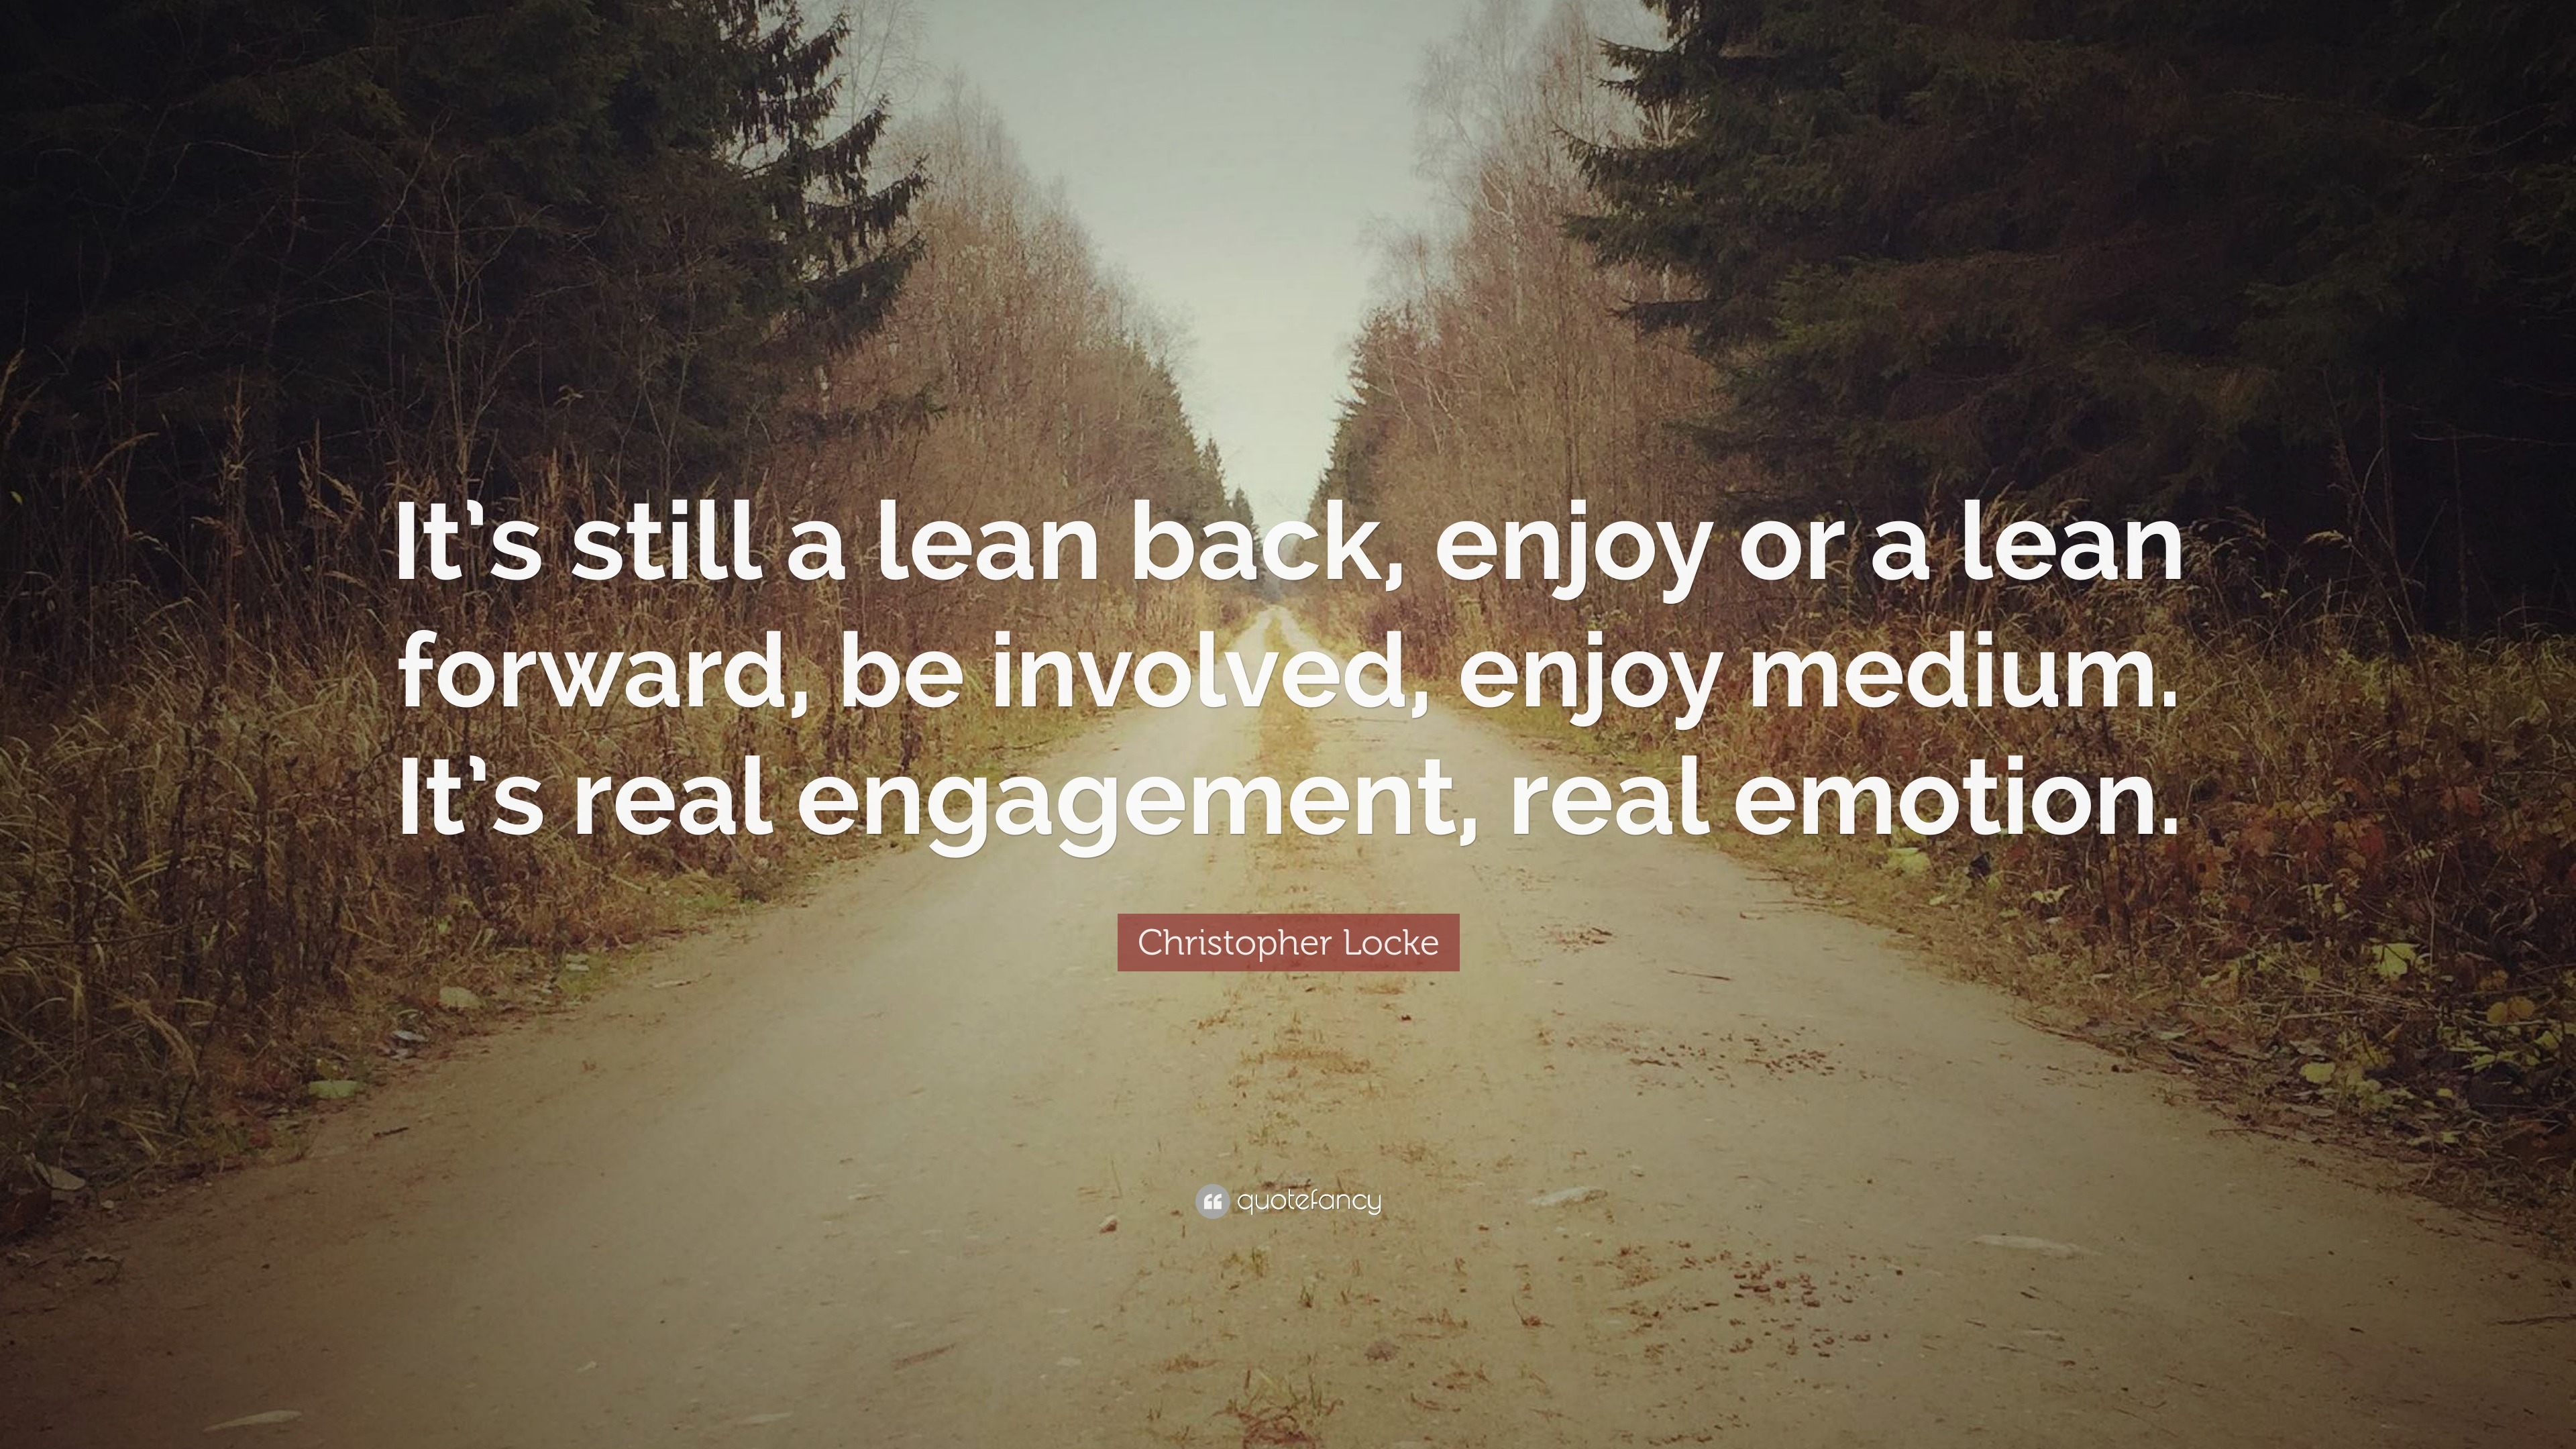 Christopher Locke Quote: “It's still a lean back, enjoy or a lean forward,  be involved, enjoy